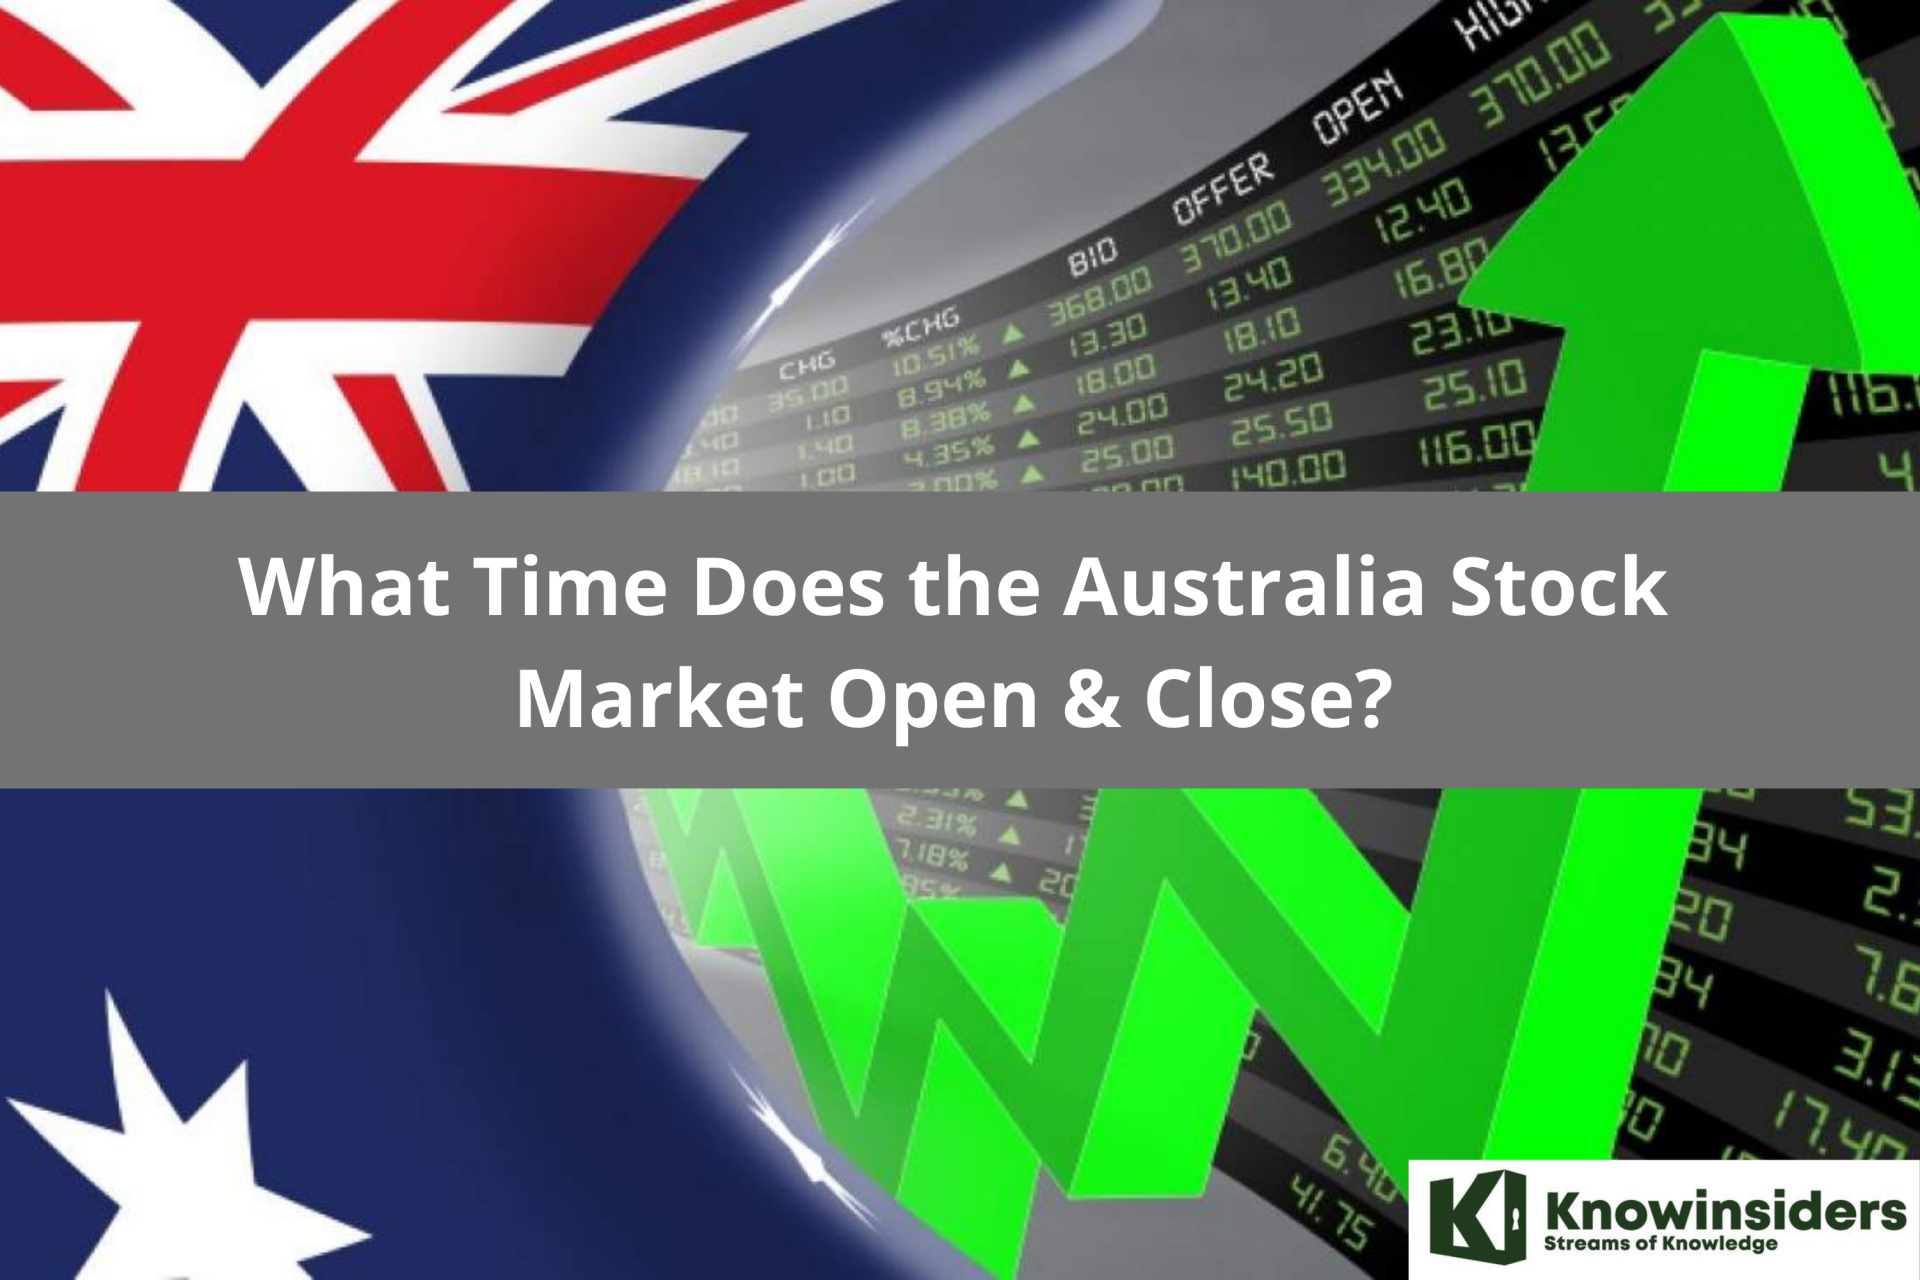 What Time Does the Australia Stock Market Open & Close?